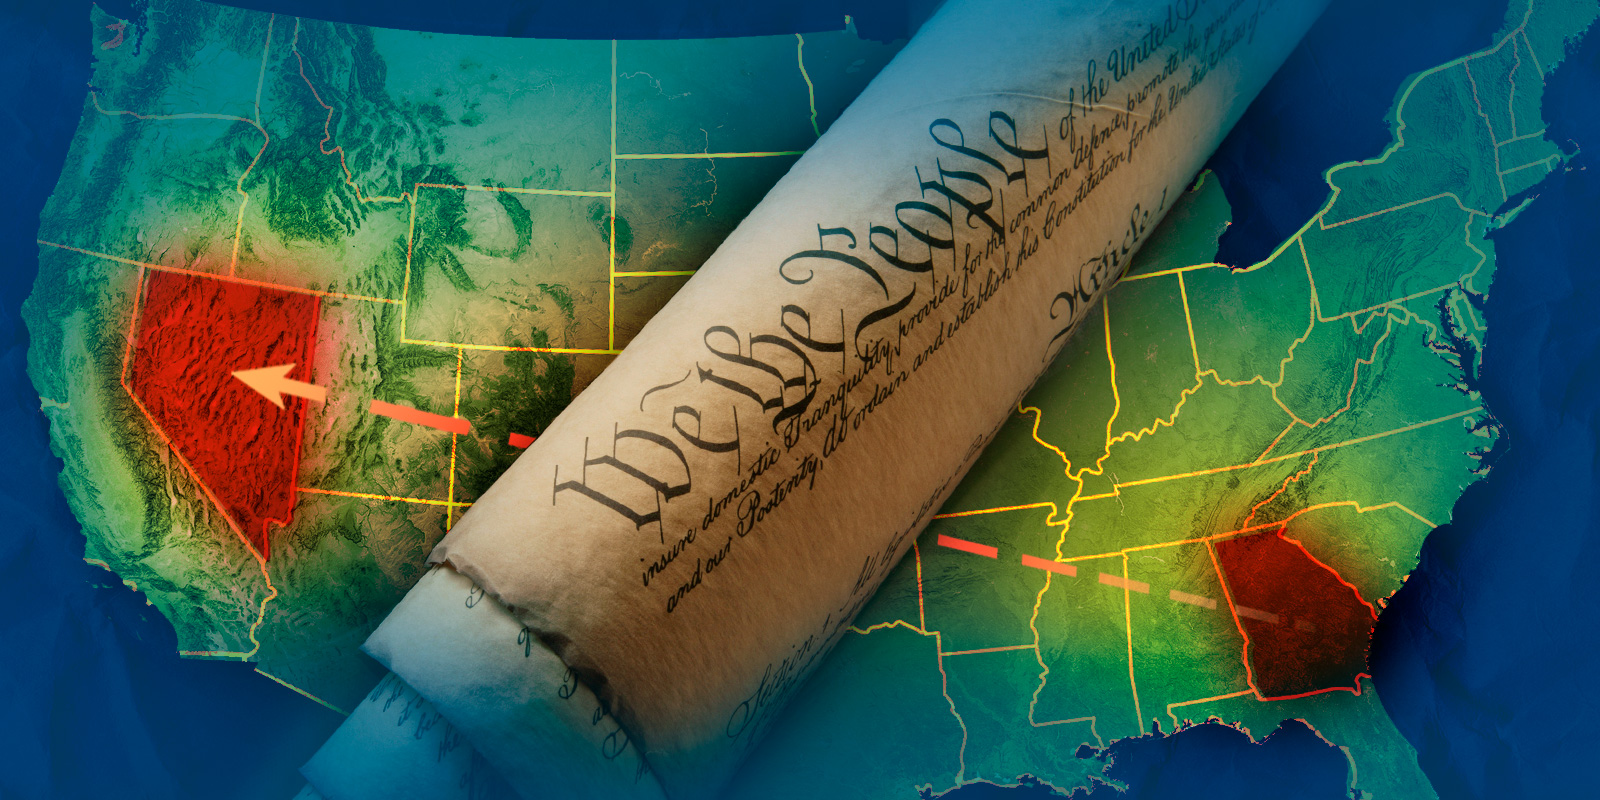 Image of constitution over map of America